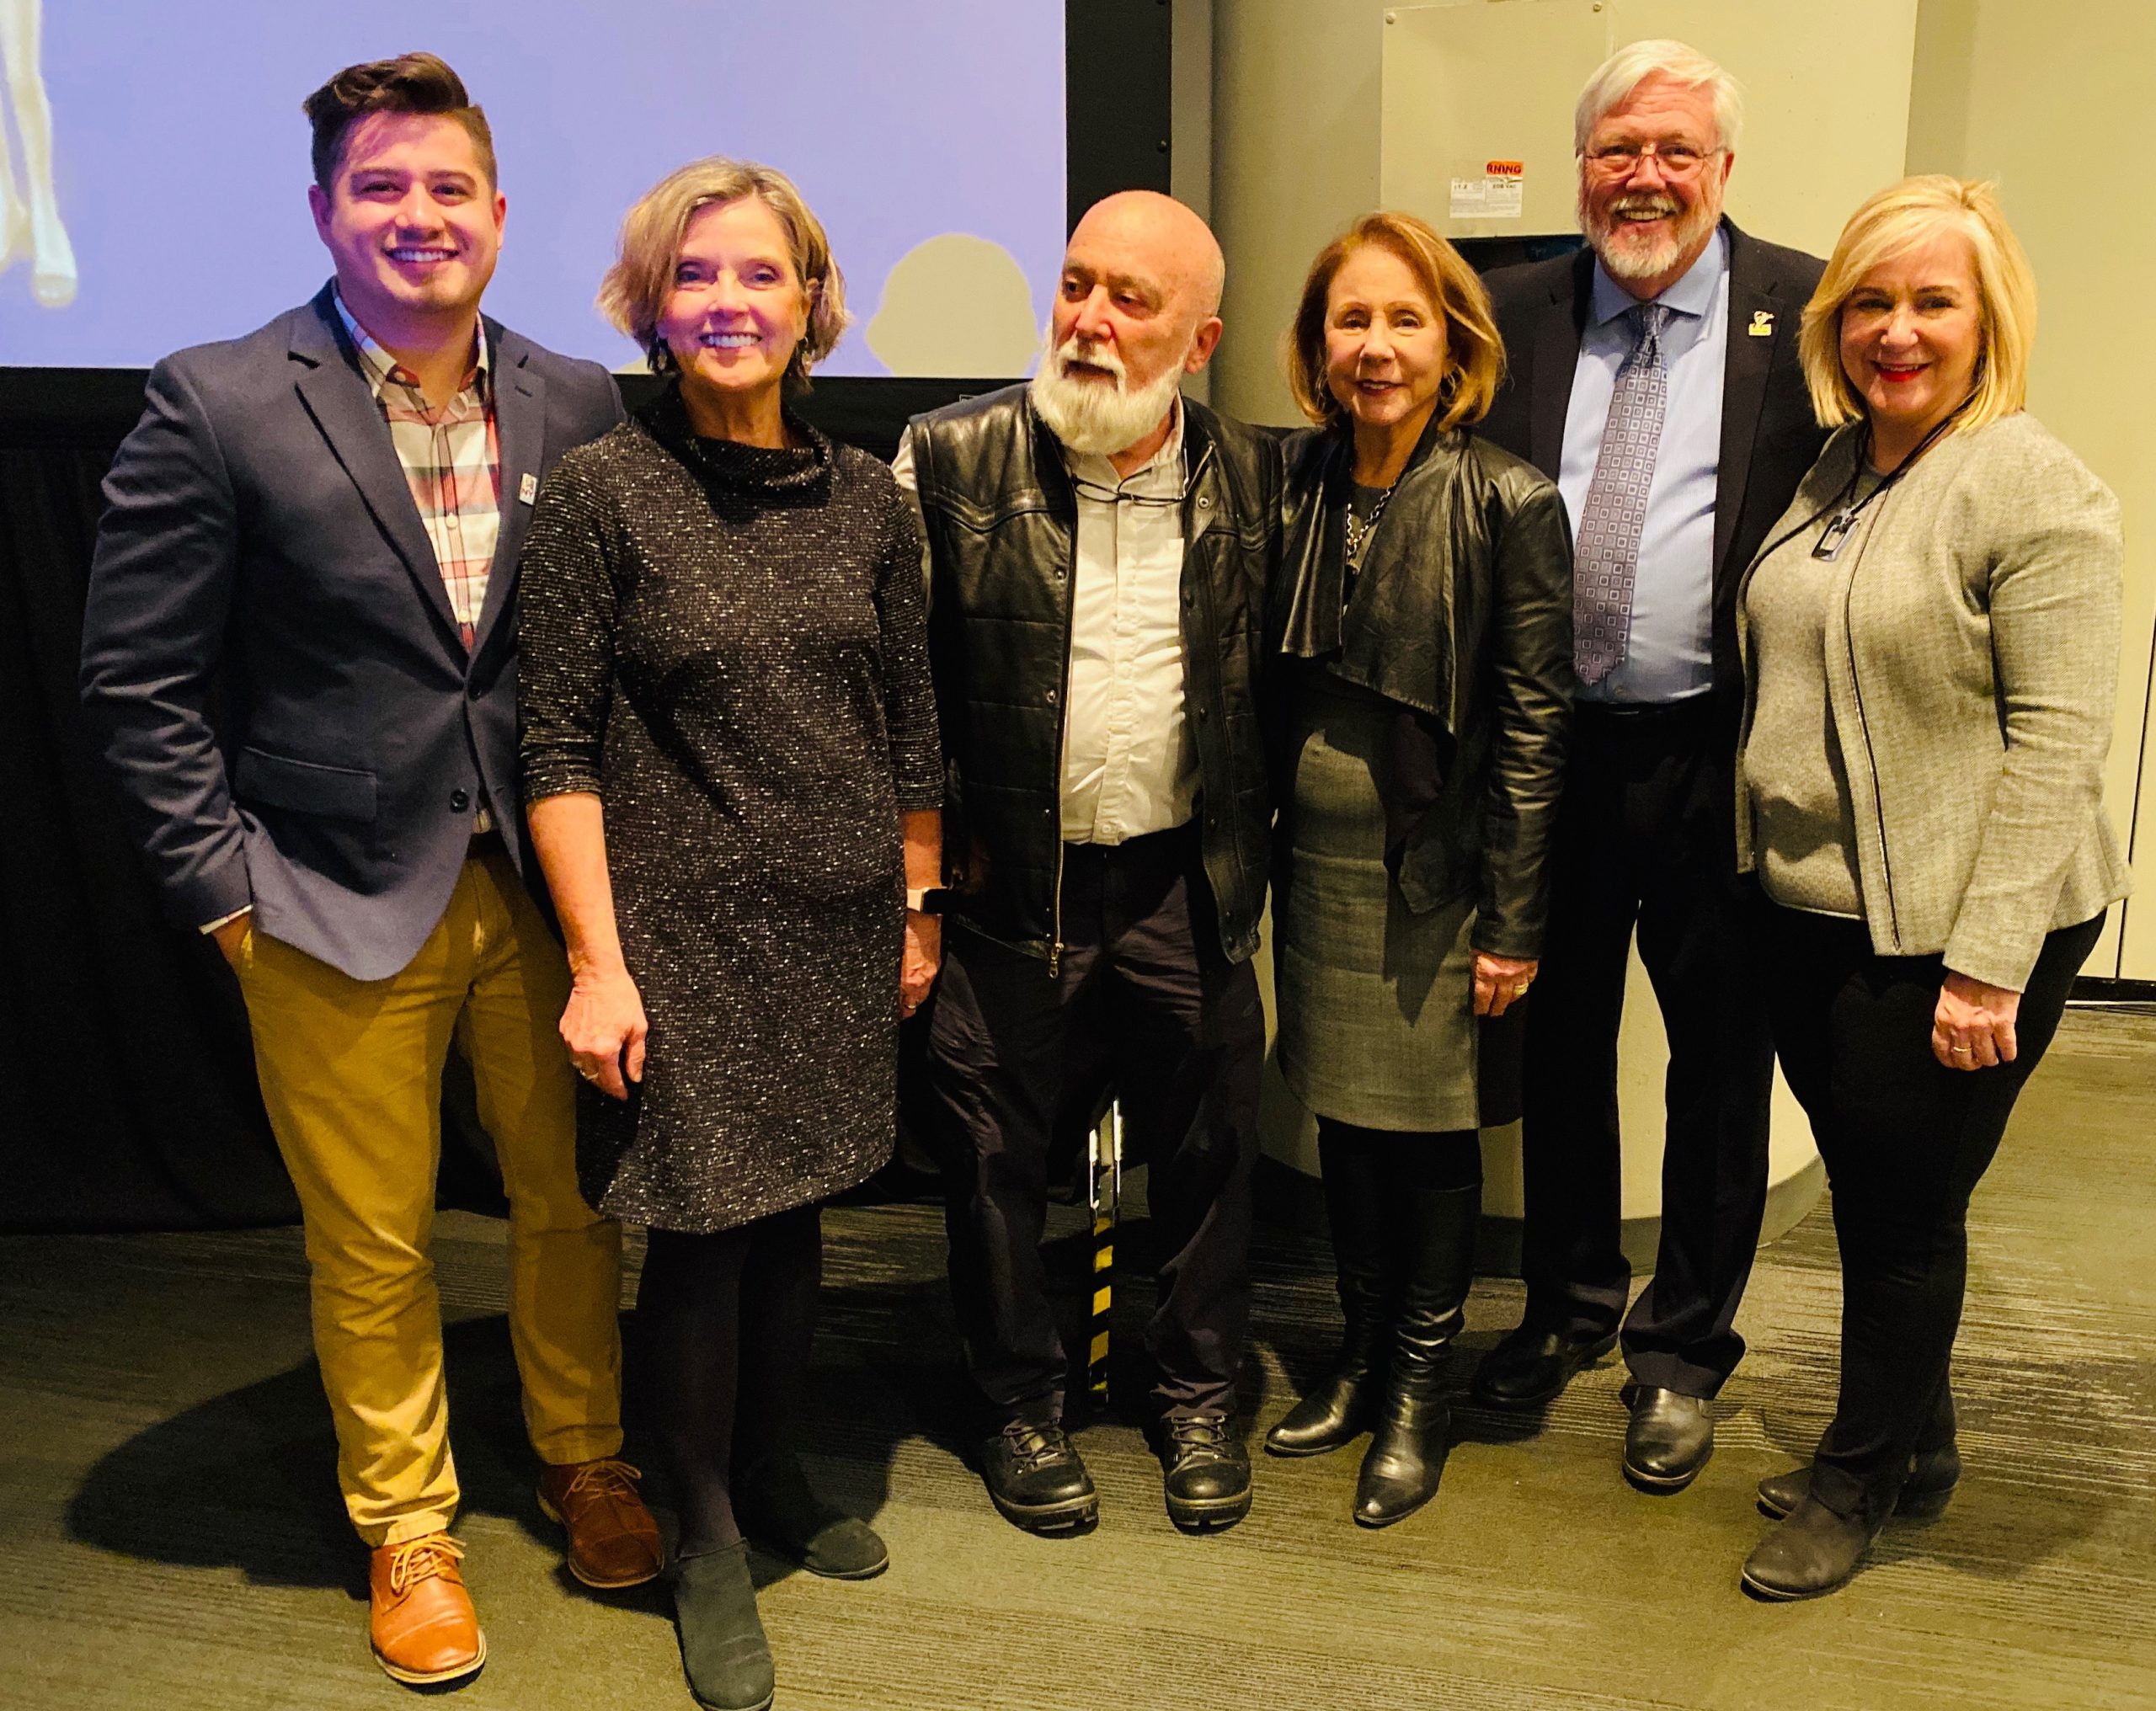 Dr. Danielsen and a group of panelists in New York City